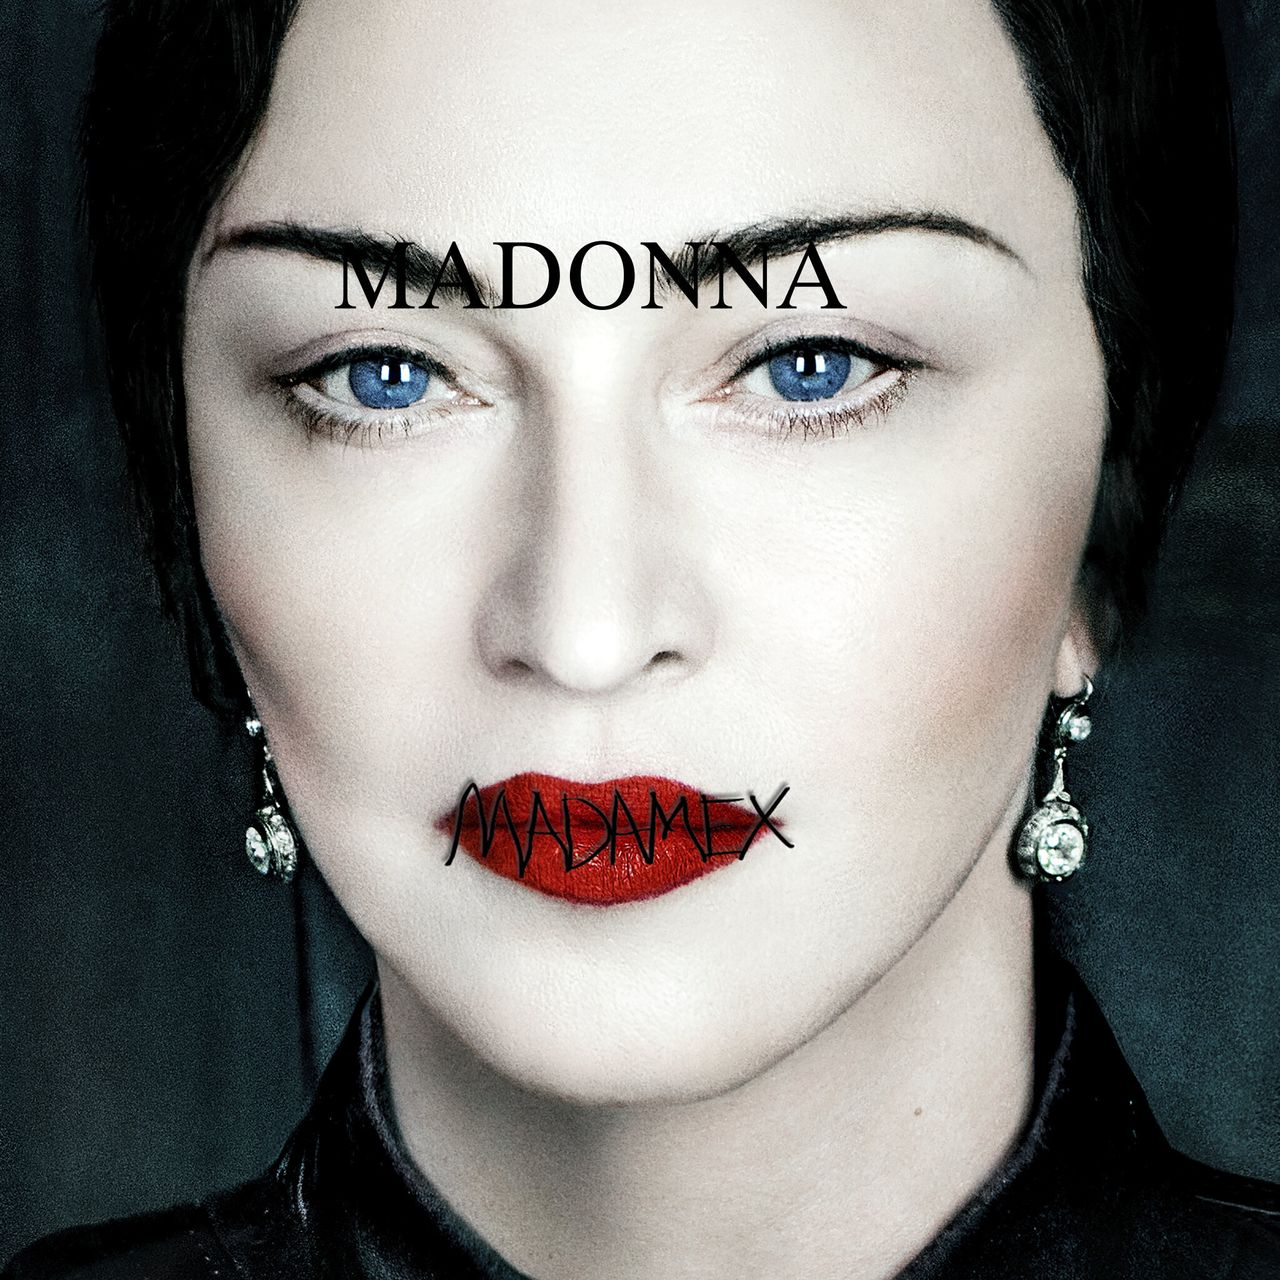 The artwork for the standard edition of Madame X